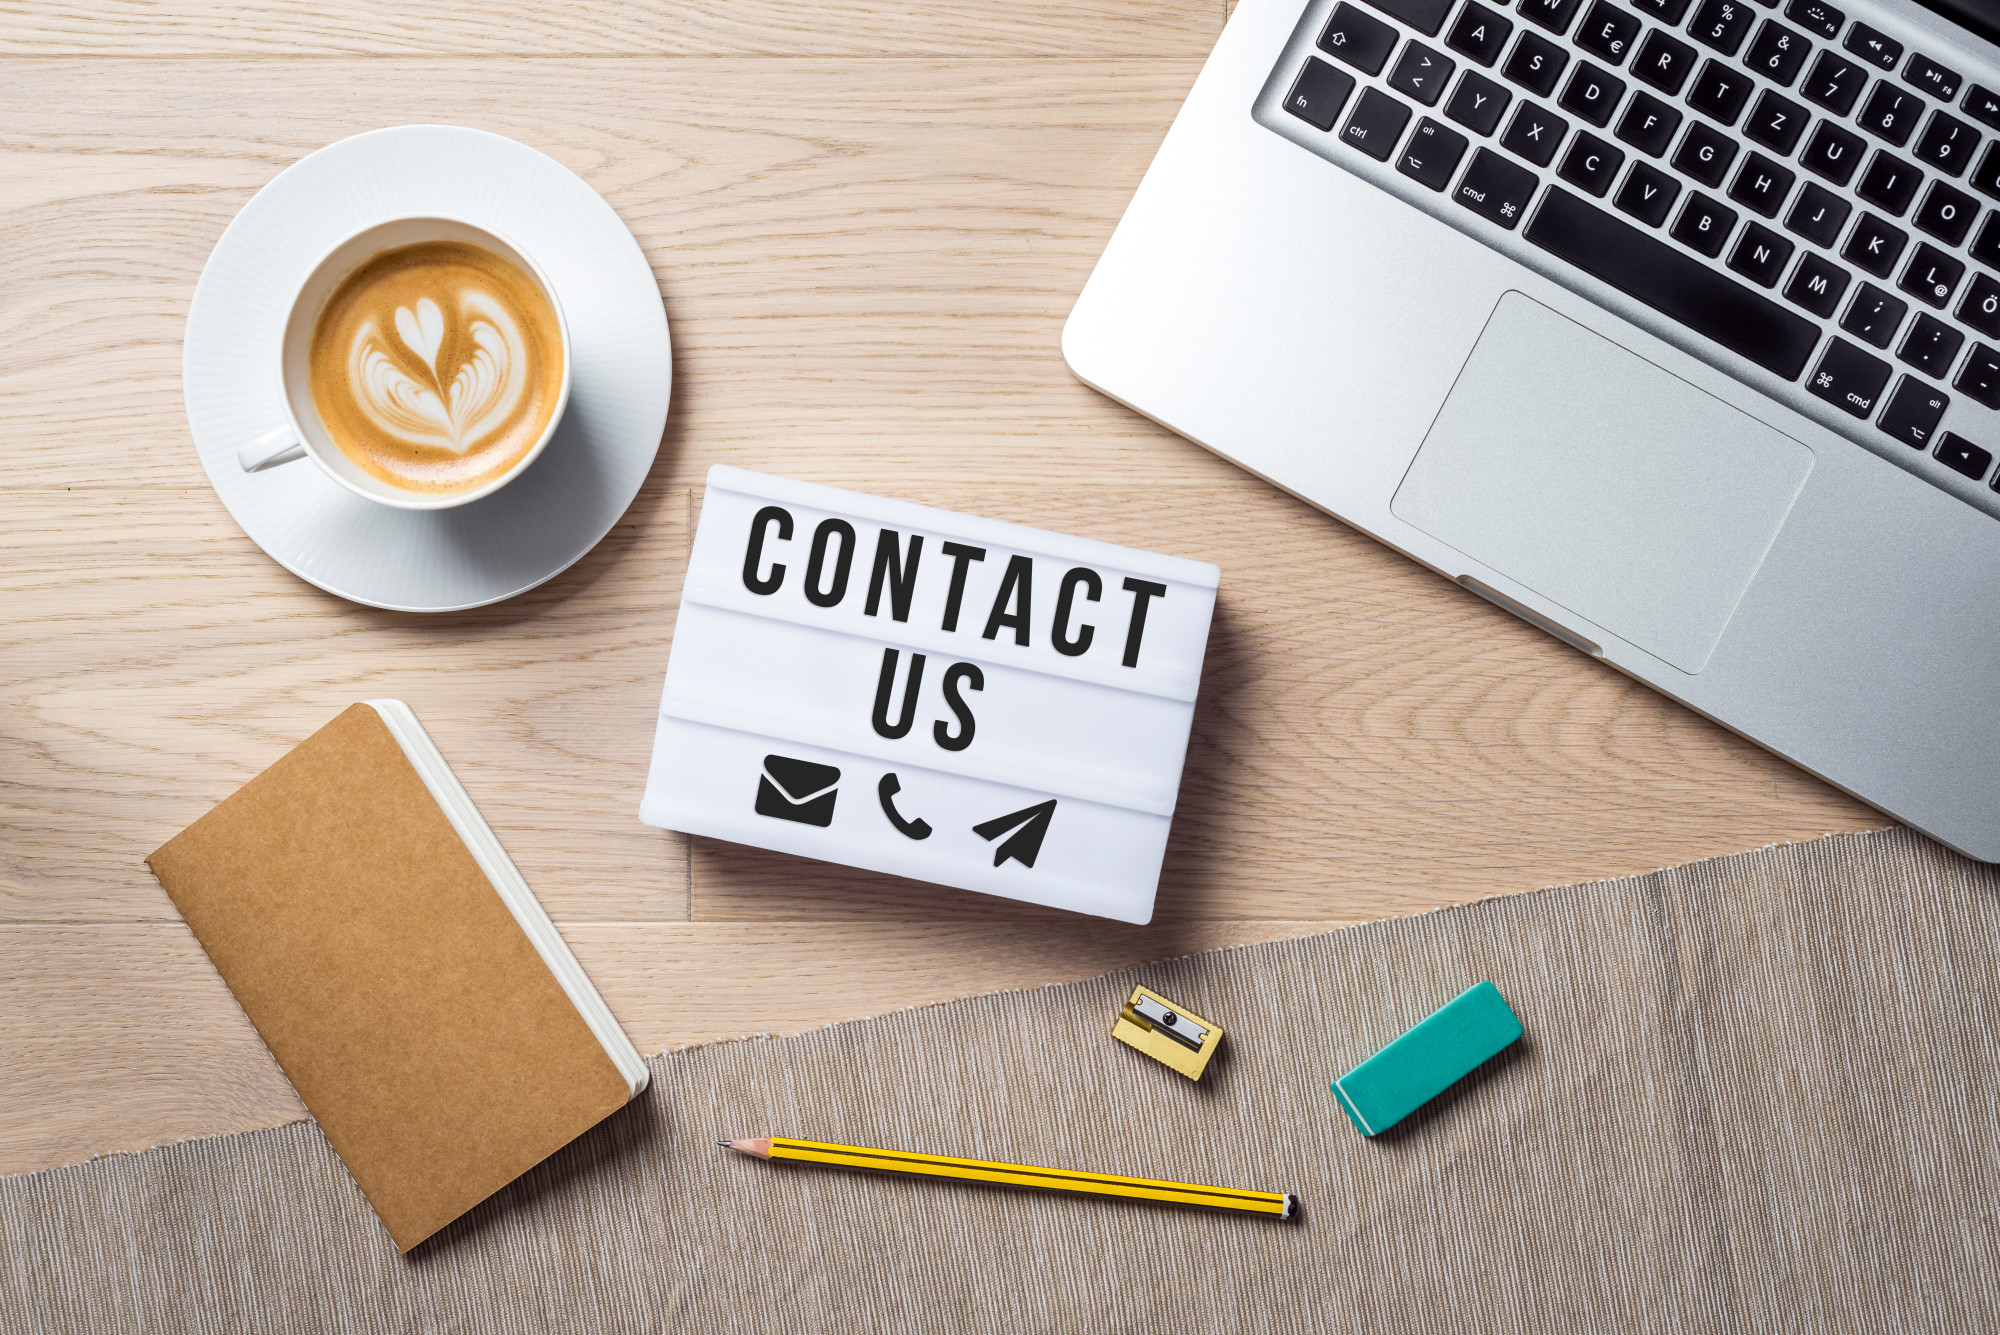 3 Tips for Creating a Contact Us Page for Small